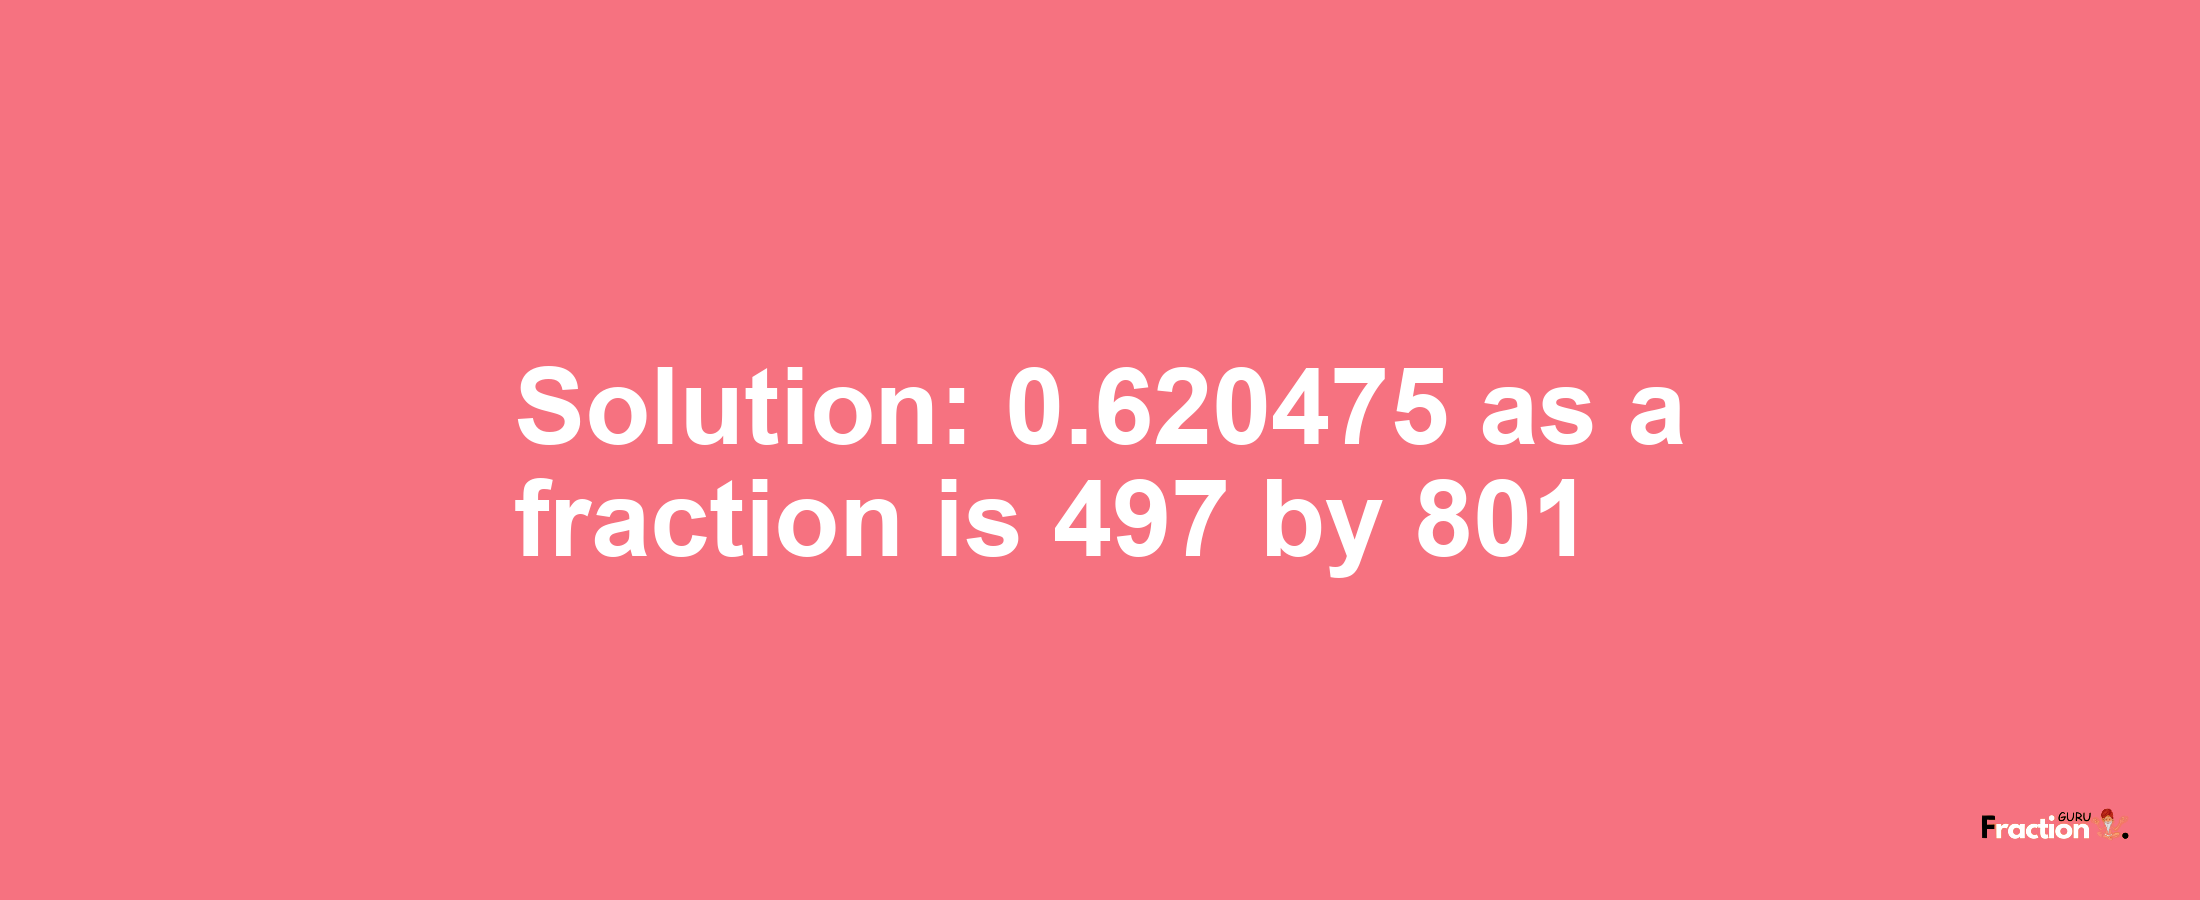 Solution:0.620475 as a fraction is 497/801